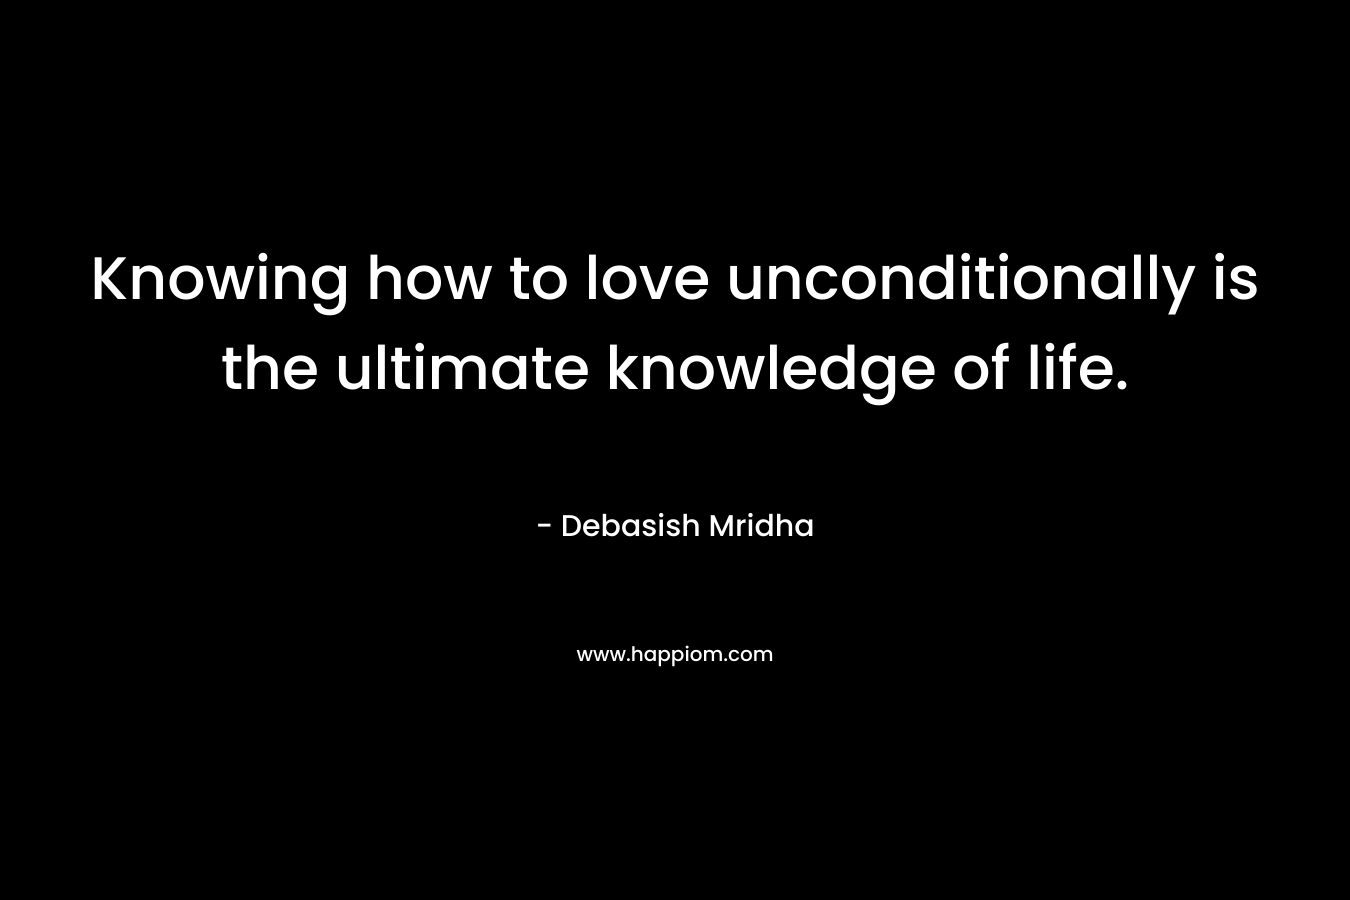 Knowing how to love unconditionally is the ultimate knowledge of life.